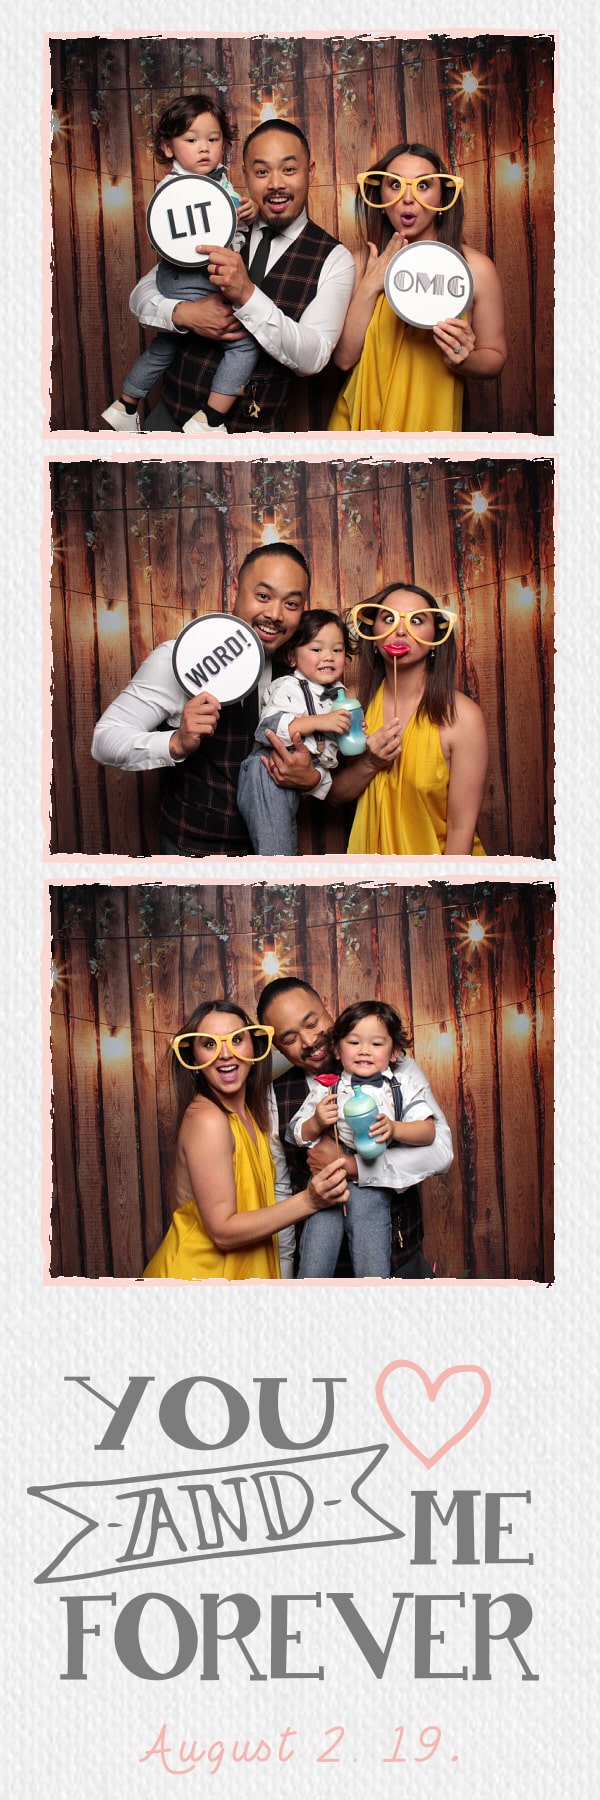 2x6 photo strip of couple with baby with props in front of wood fence backdrop